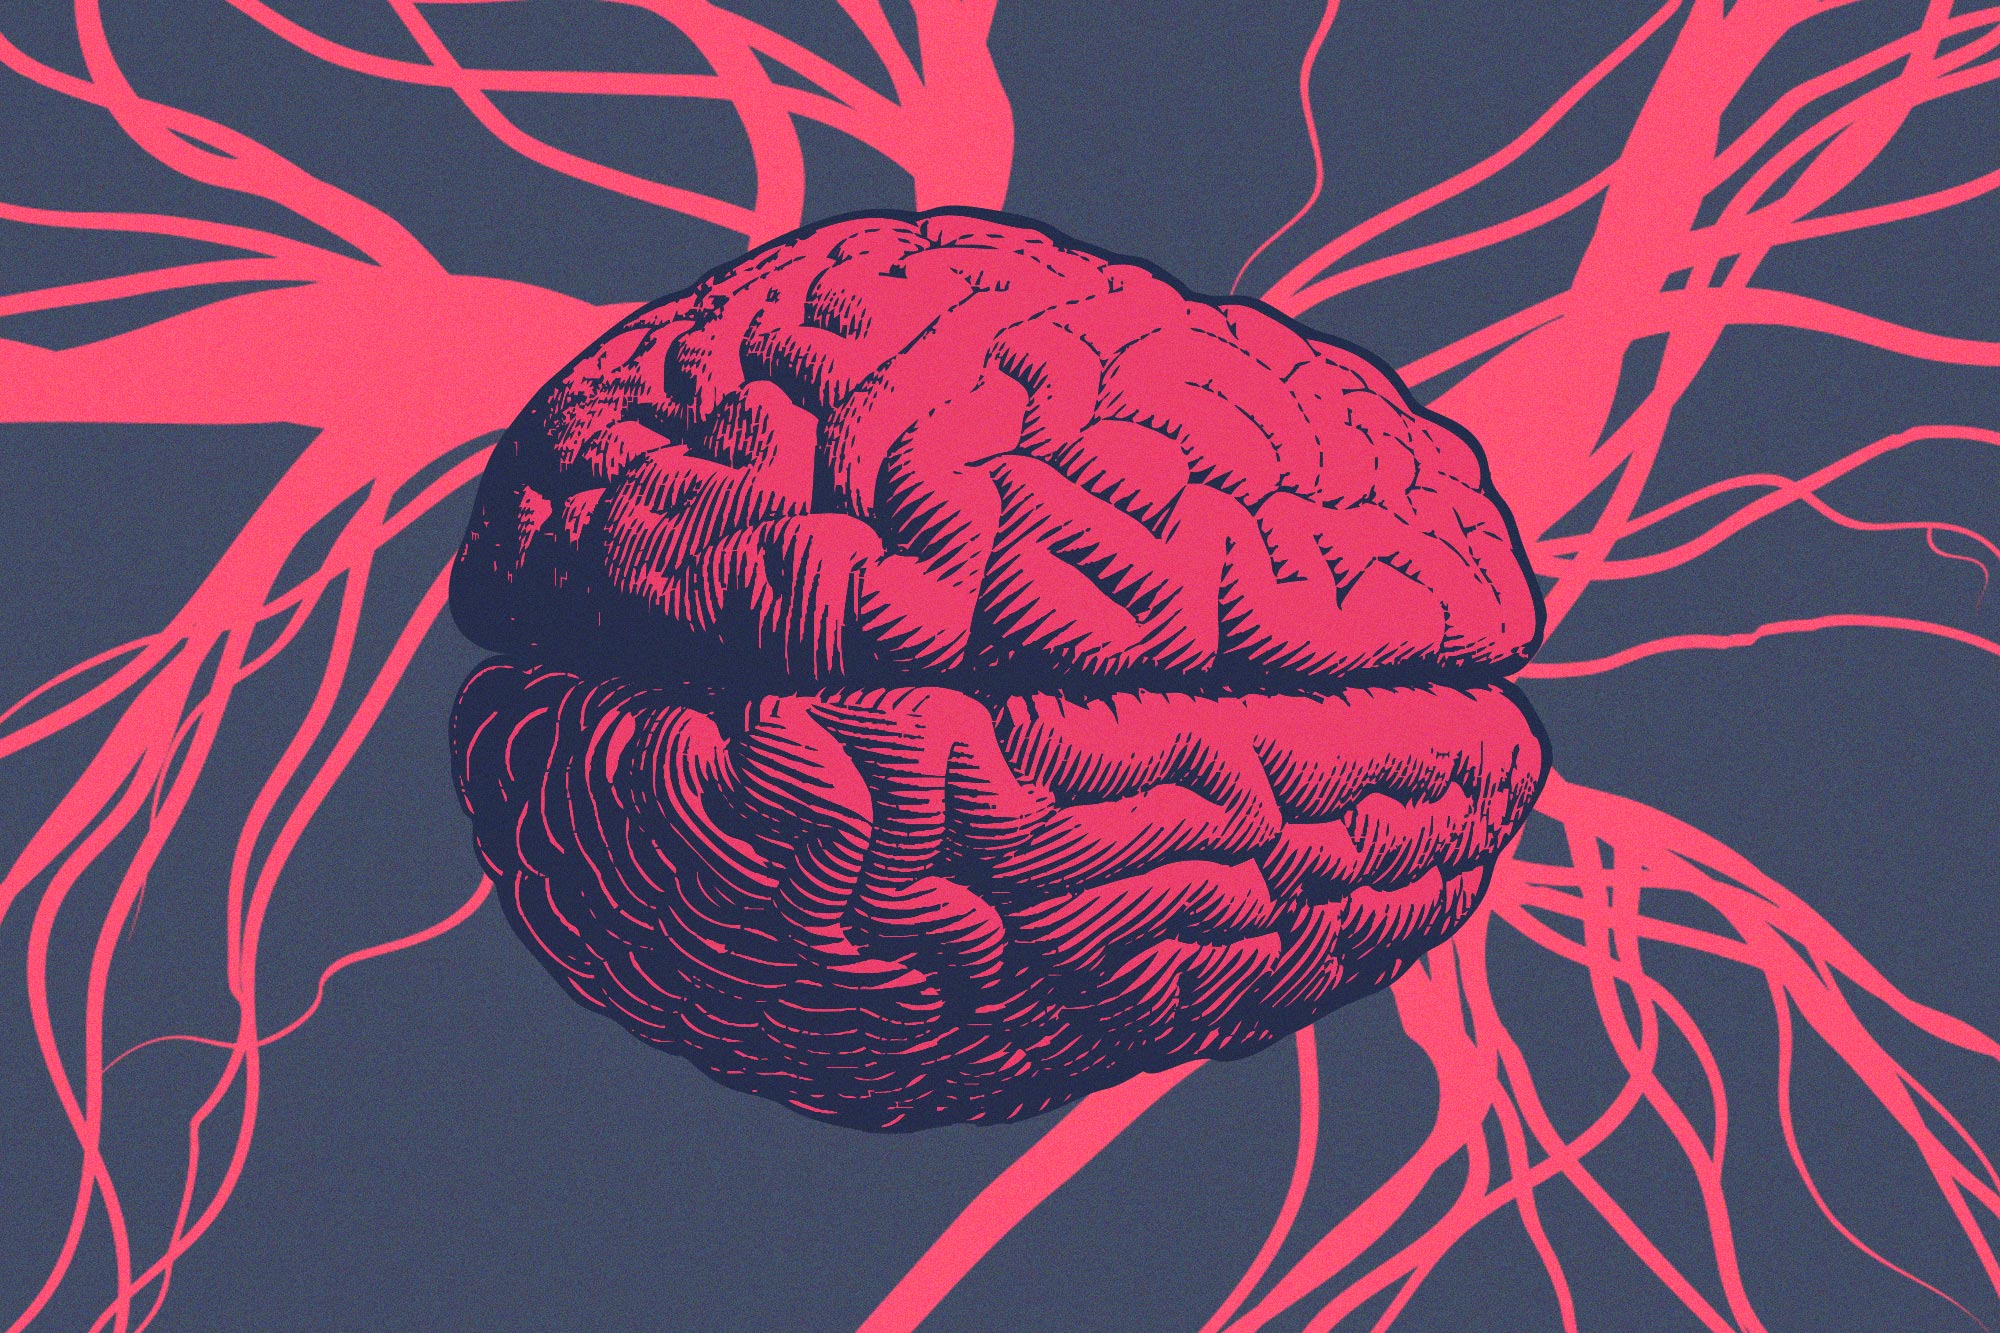 Illustration of a brain with various lines coming out going to the corners of the image